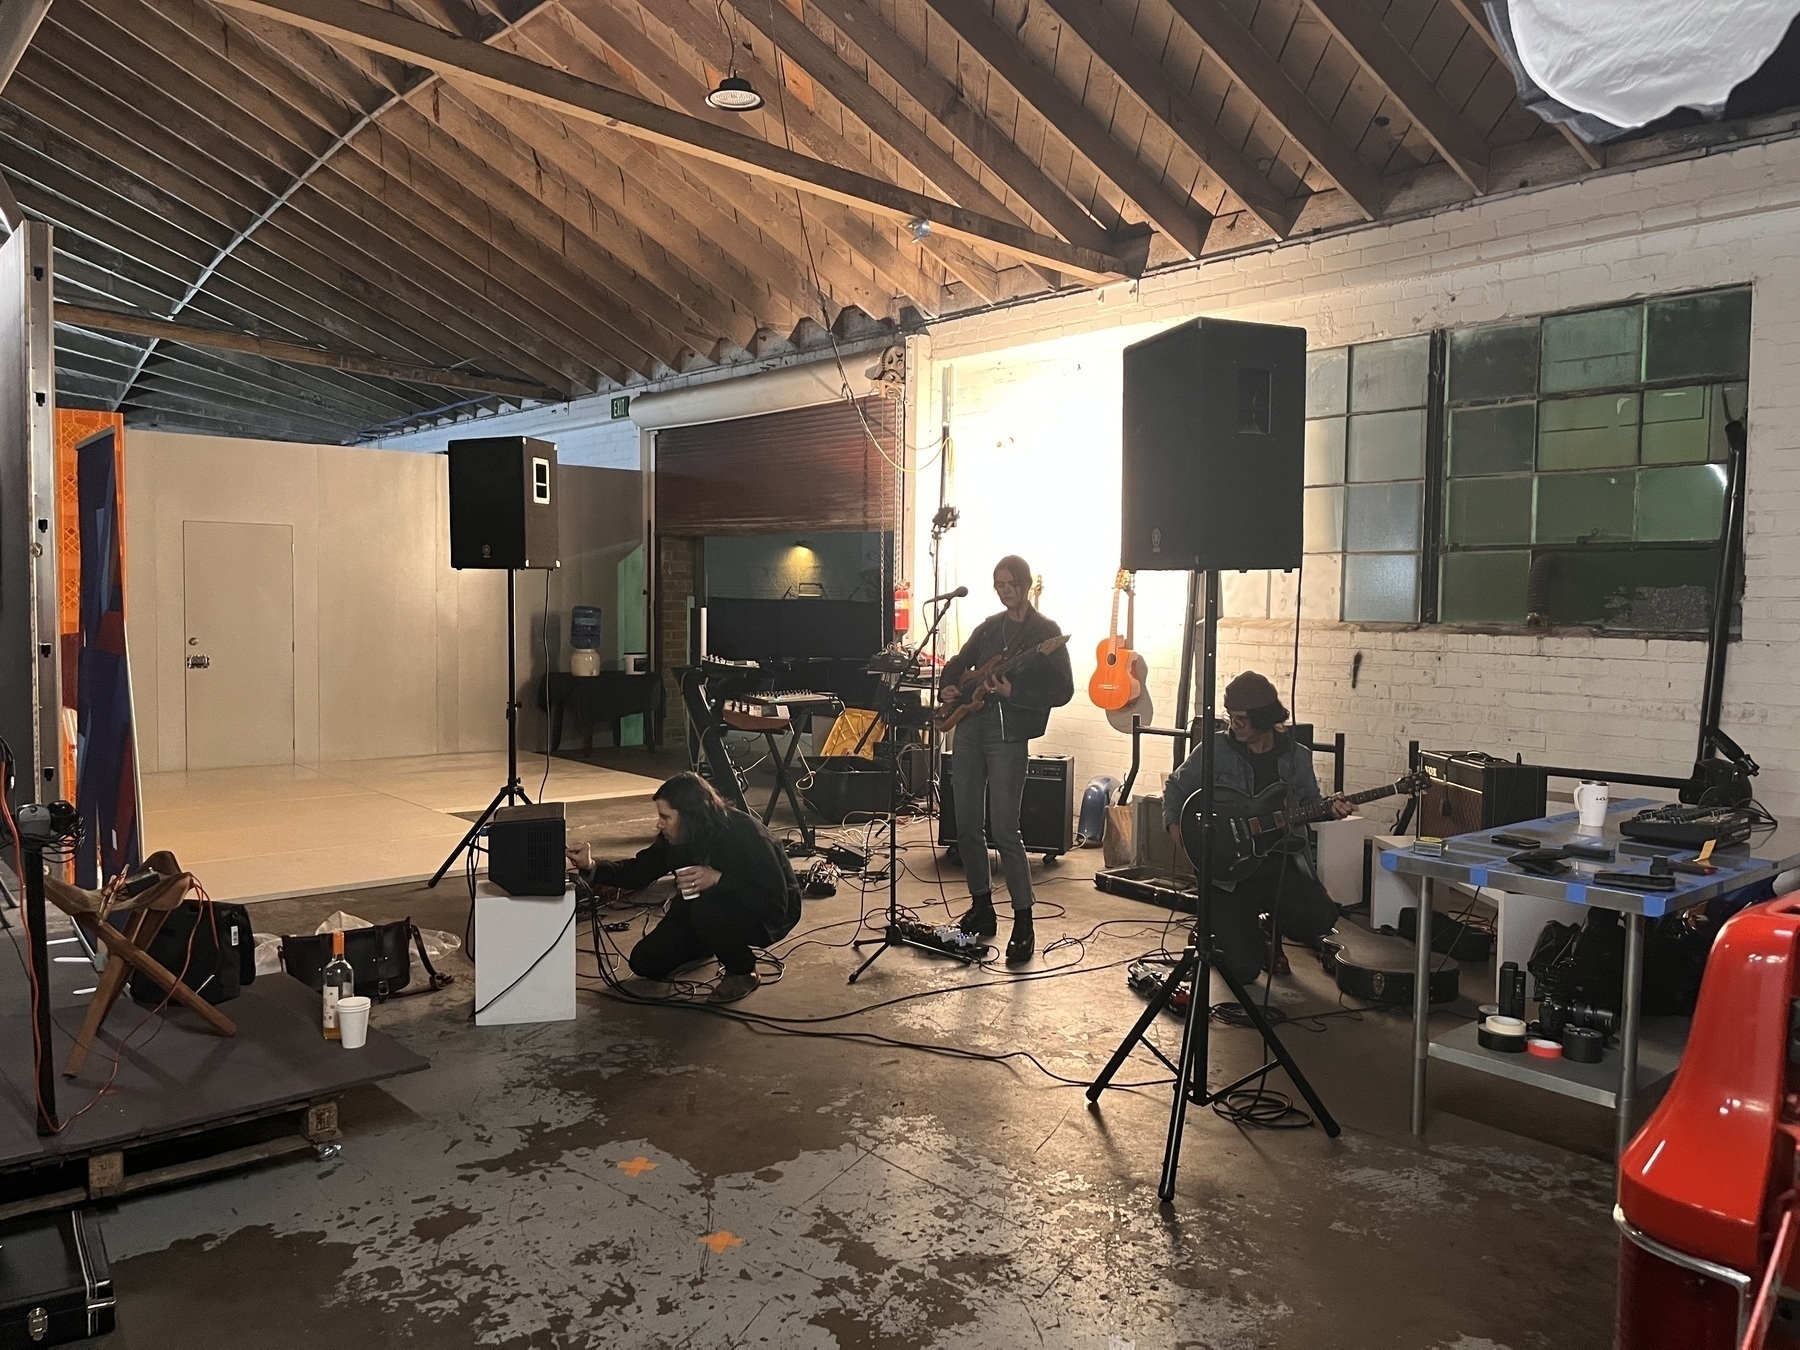 A industrial warehouse with three white people playing instruments. Two guitars and one guy crouching by a monitor. 